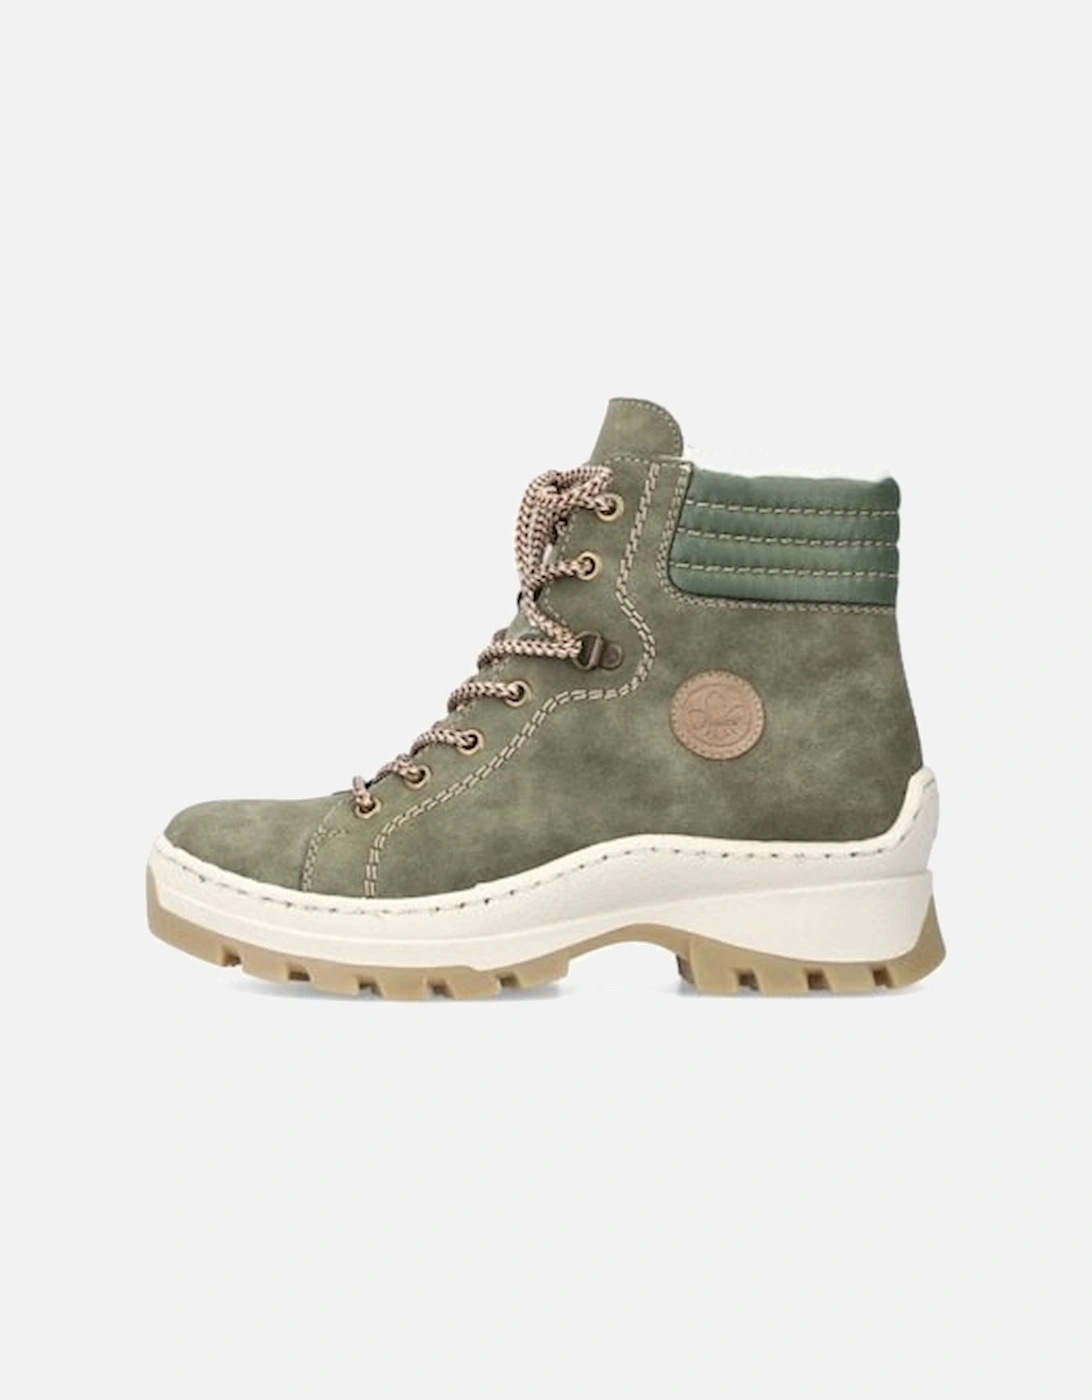 Women's Zipper Ankle Boots Olive